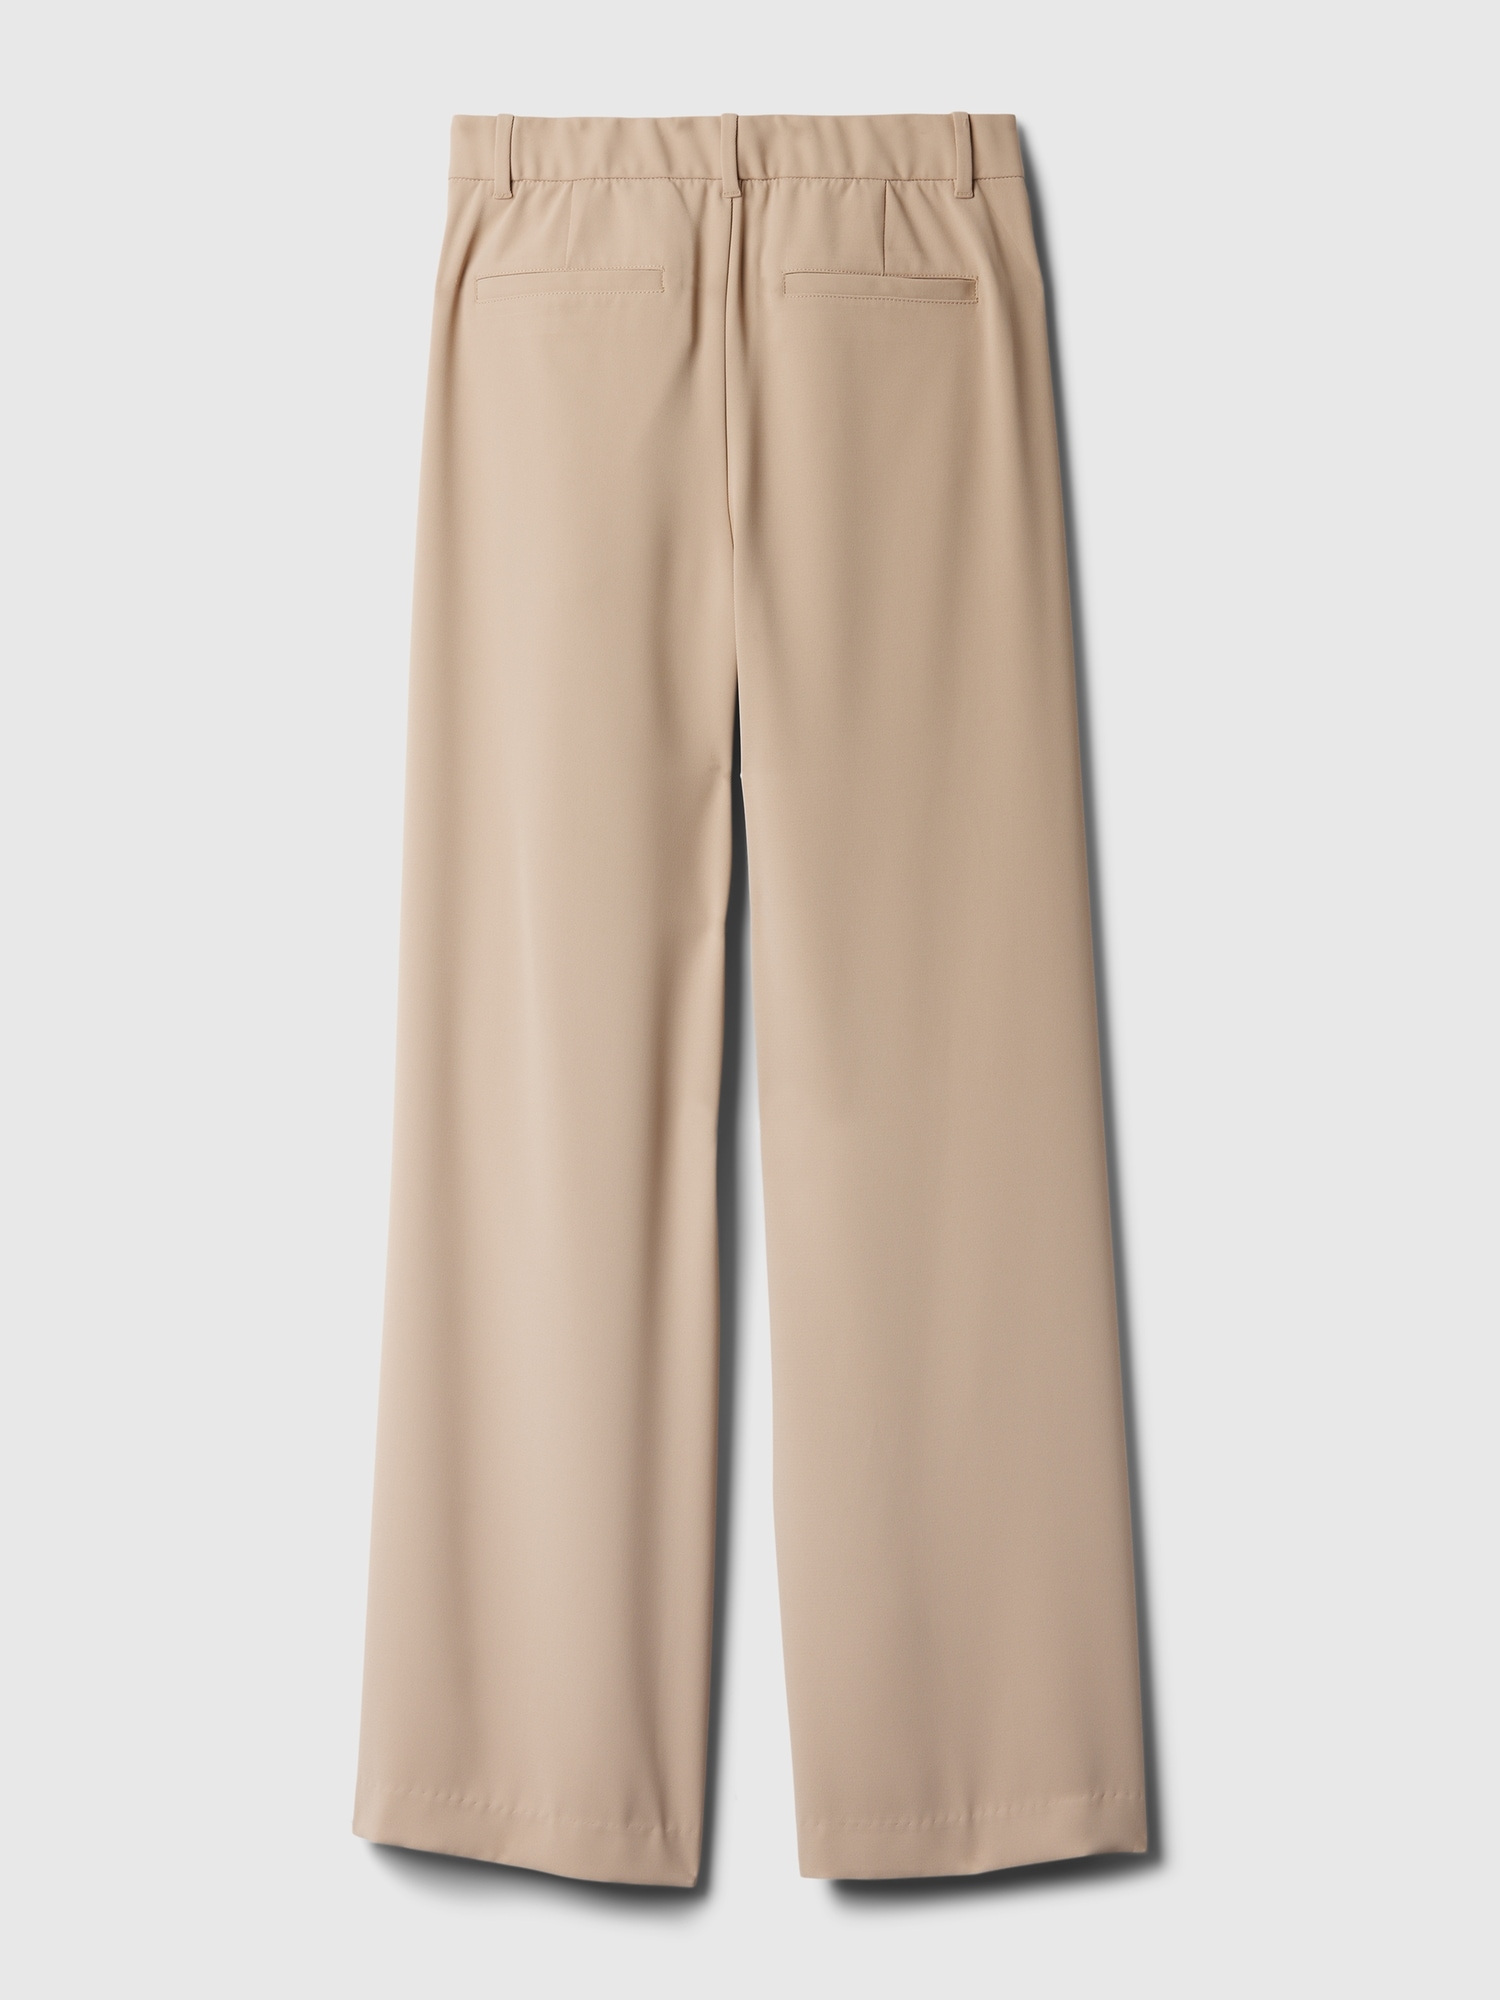 Uniqlo Wide Straight Pants Review: Effortless, Cool-Girl Trousers